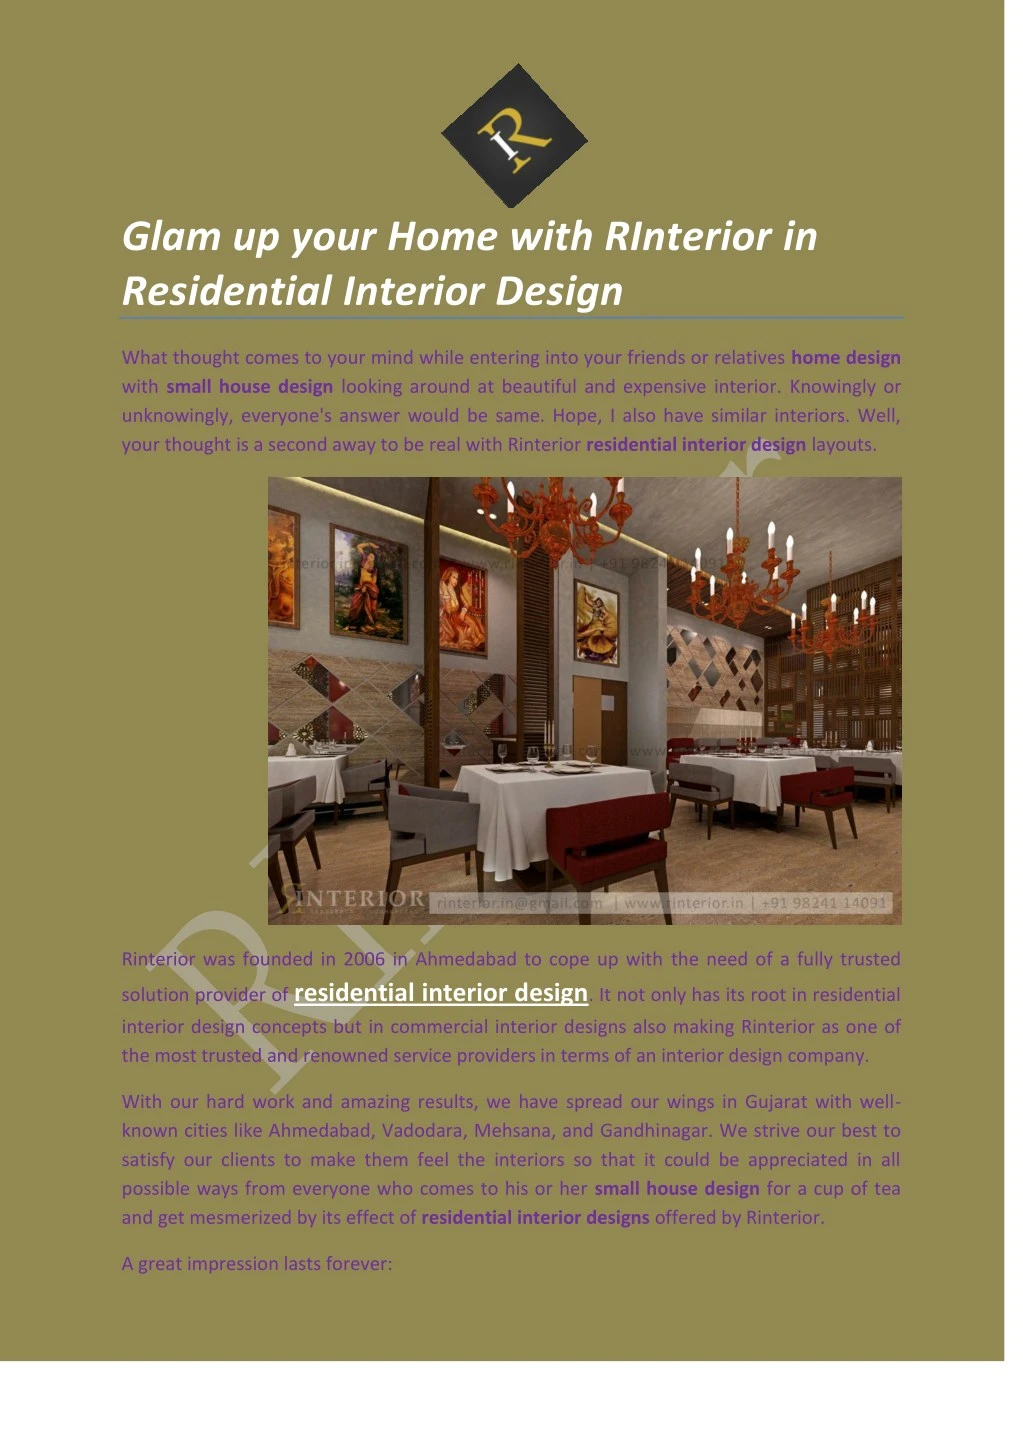 glam up your home with rinterior in residential